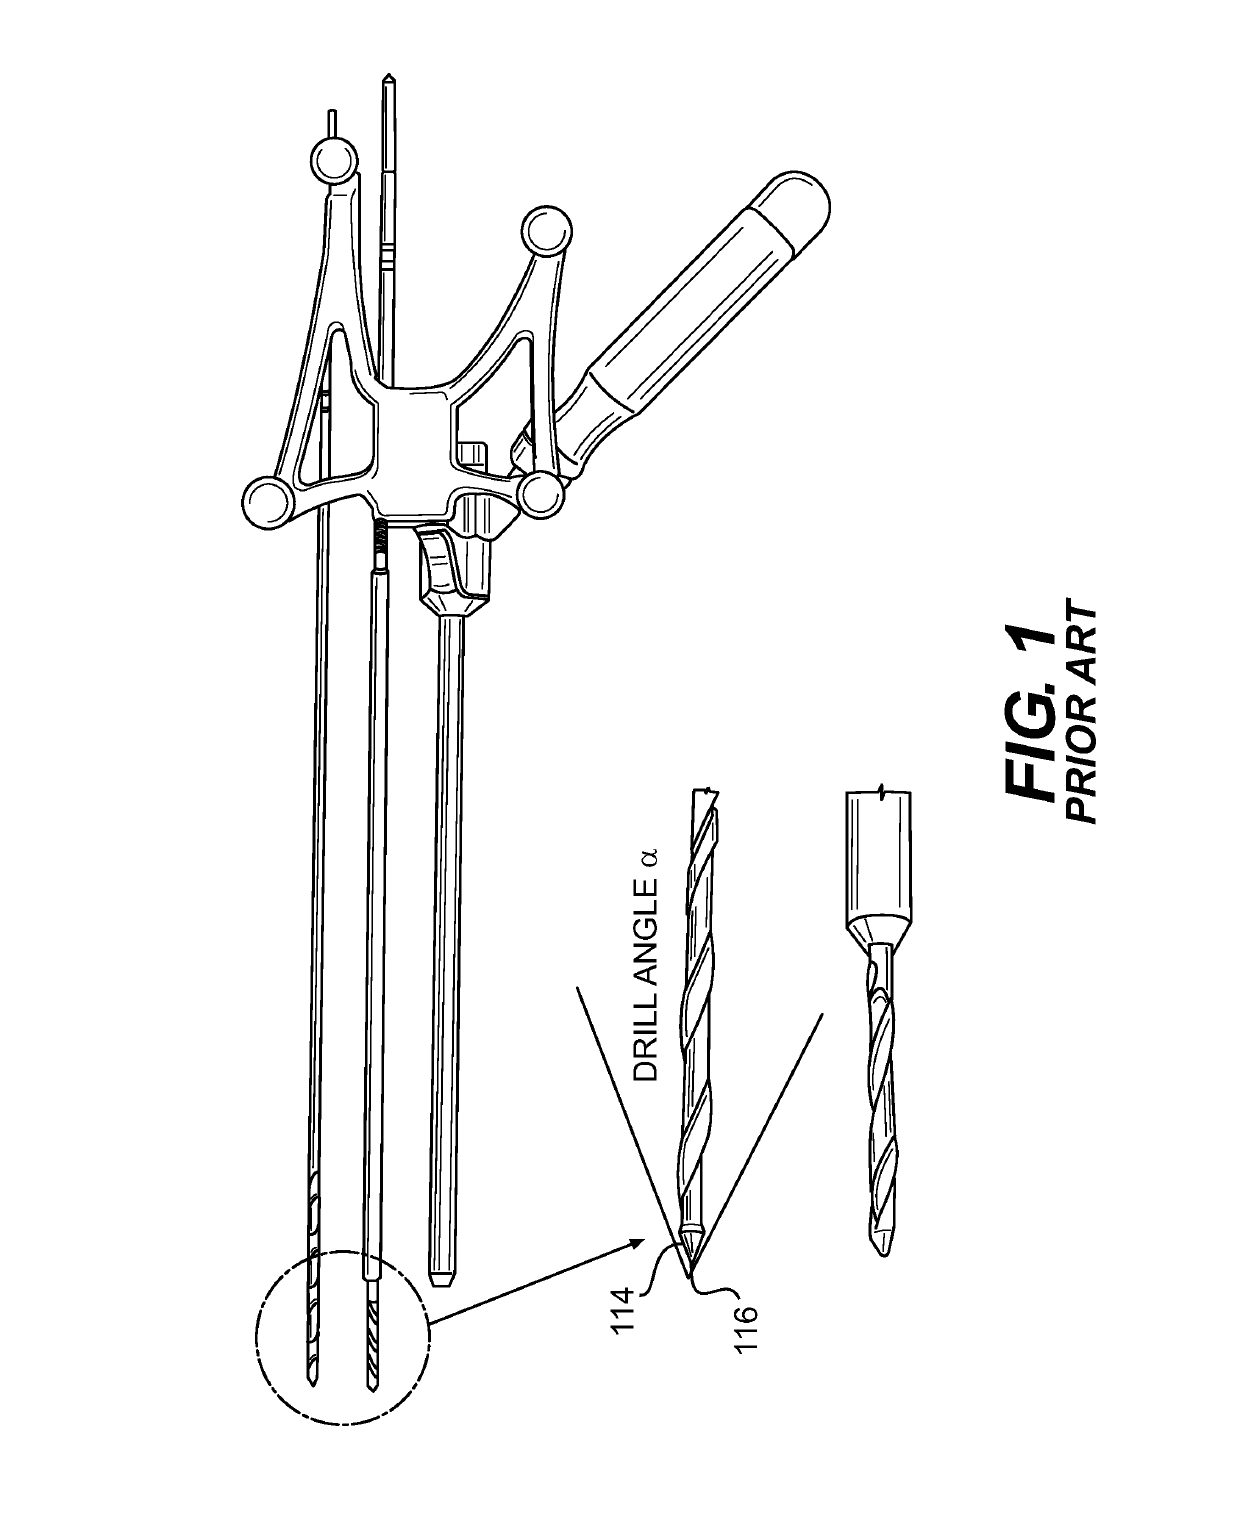 Anti-skid surgical instrument for use in preparing holes in bone tissue